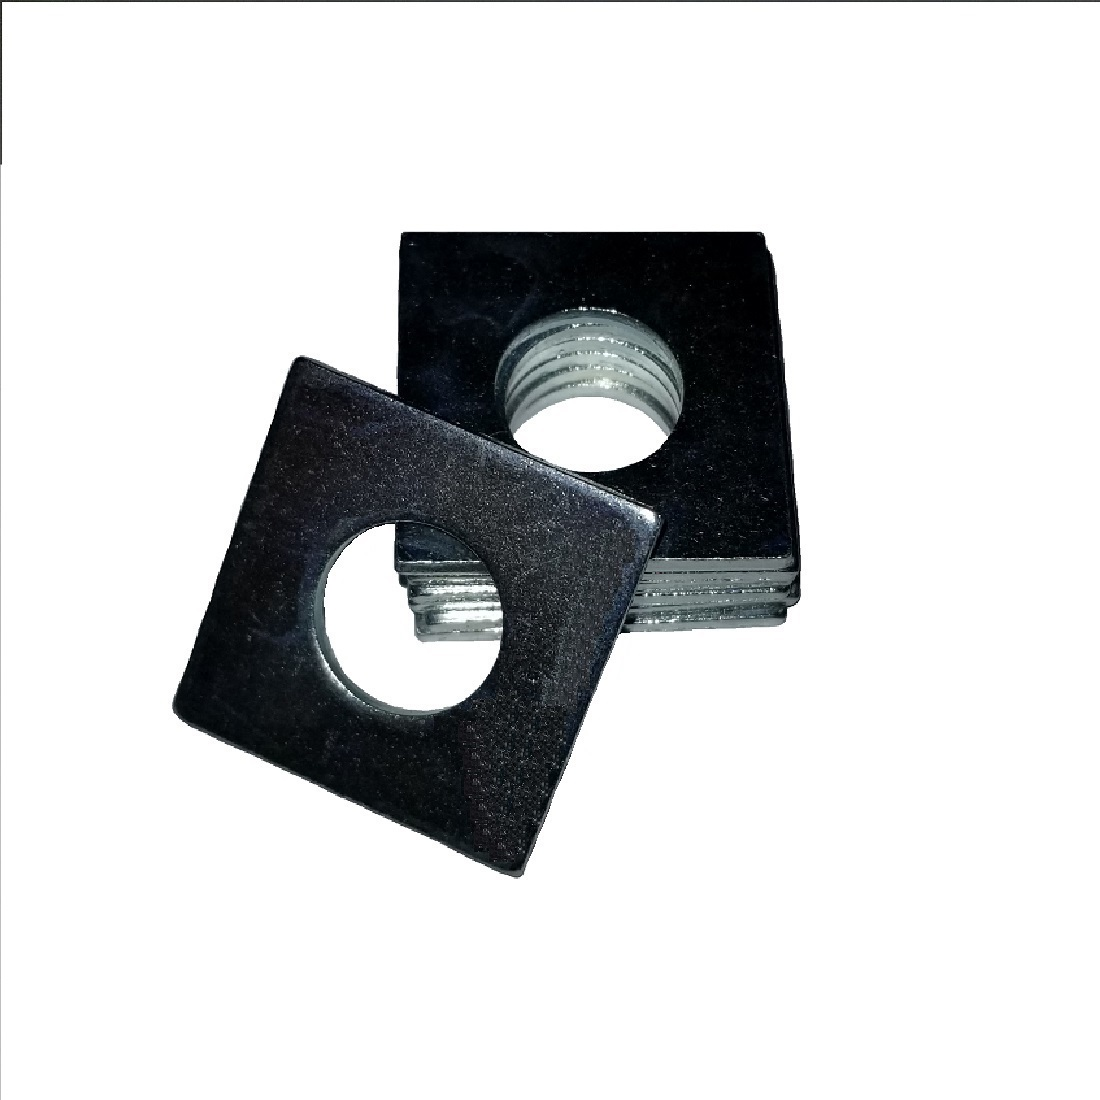 Square OD Washer - 0.437 ID, 2.000 OD, 0.250 Thick, Spring Steel - Hard, Black Oxide